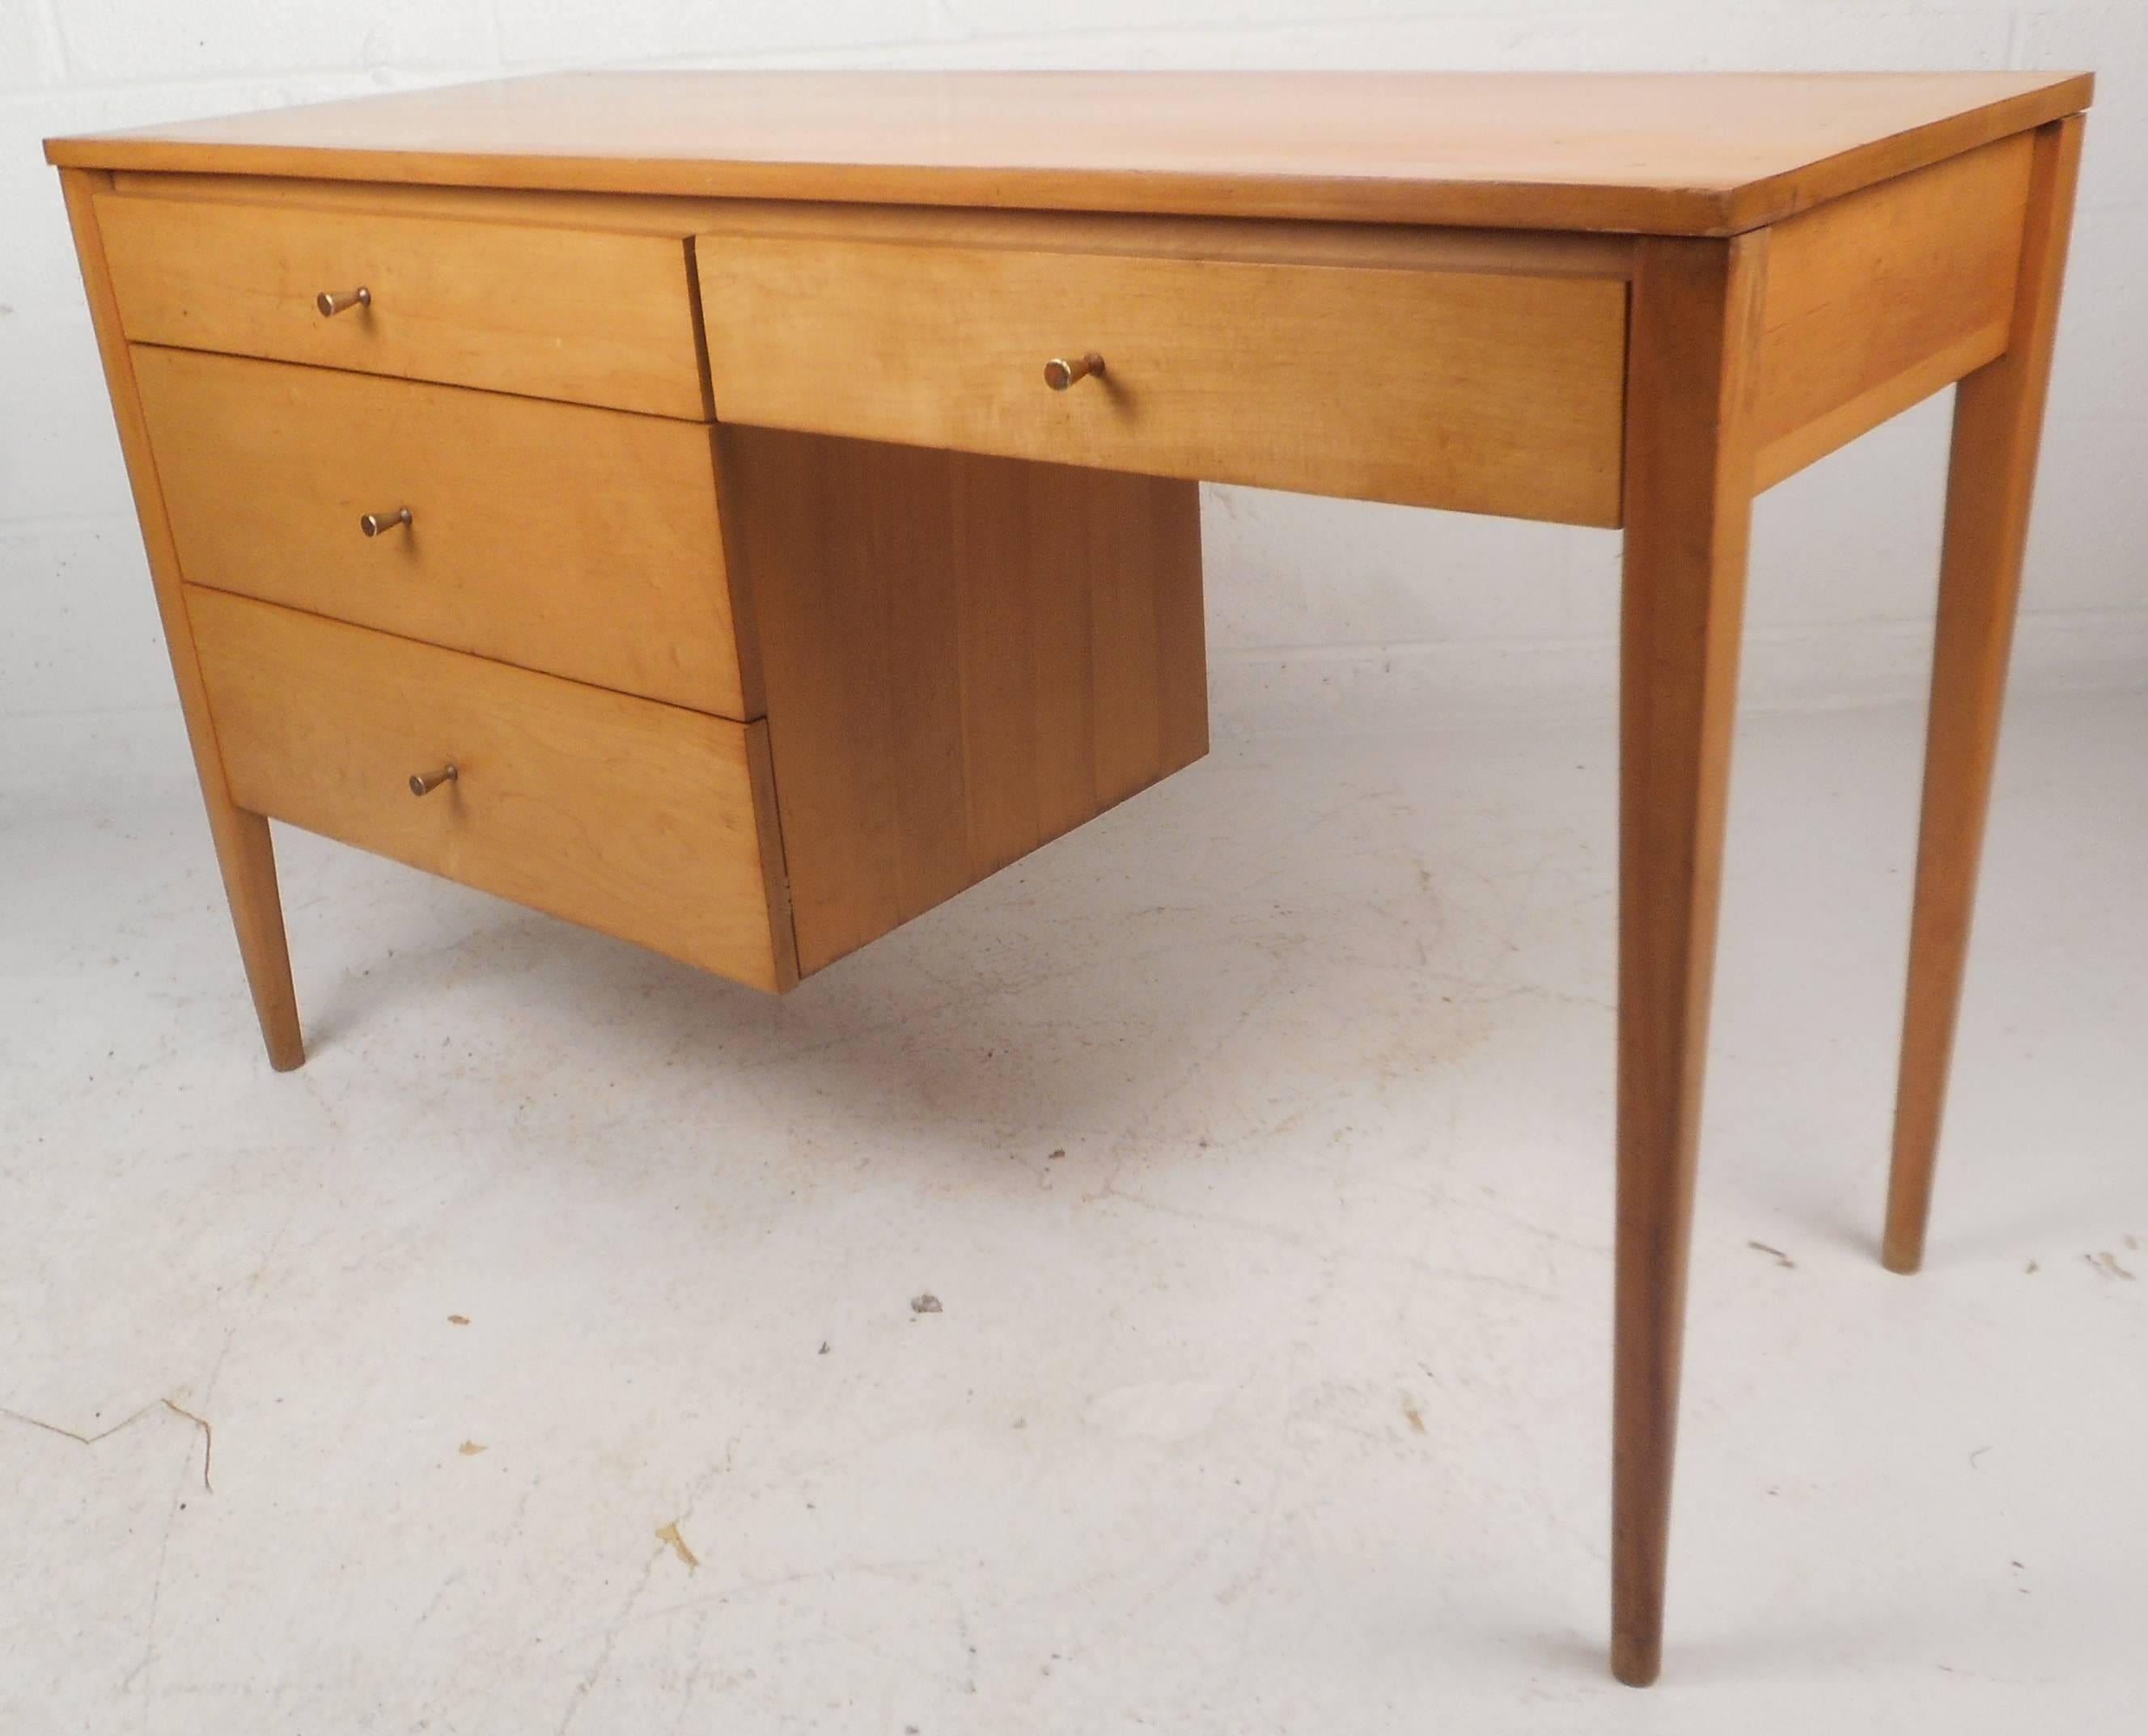 This stunning Mid-Century desk or vanity by Paul McCobb features a vintage maple finish with four drawers. Sleek design with unique cone shaped brass pulls and long tapered legs. This beautiful piece offers plenty of room for storage while providing